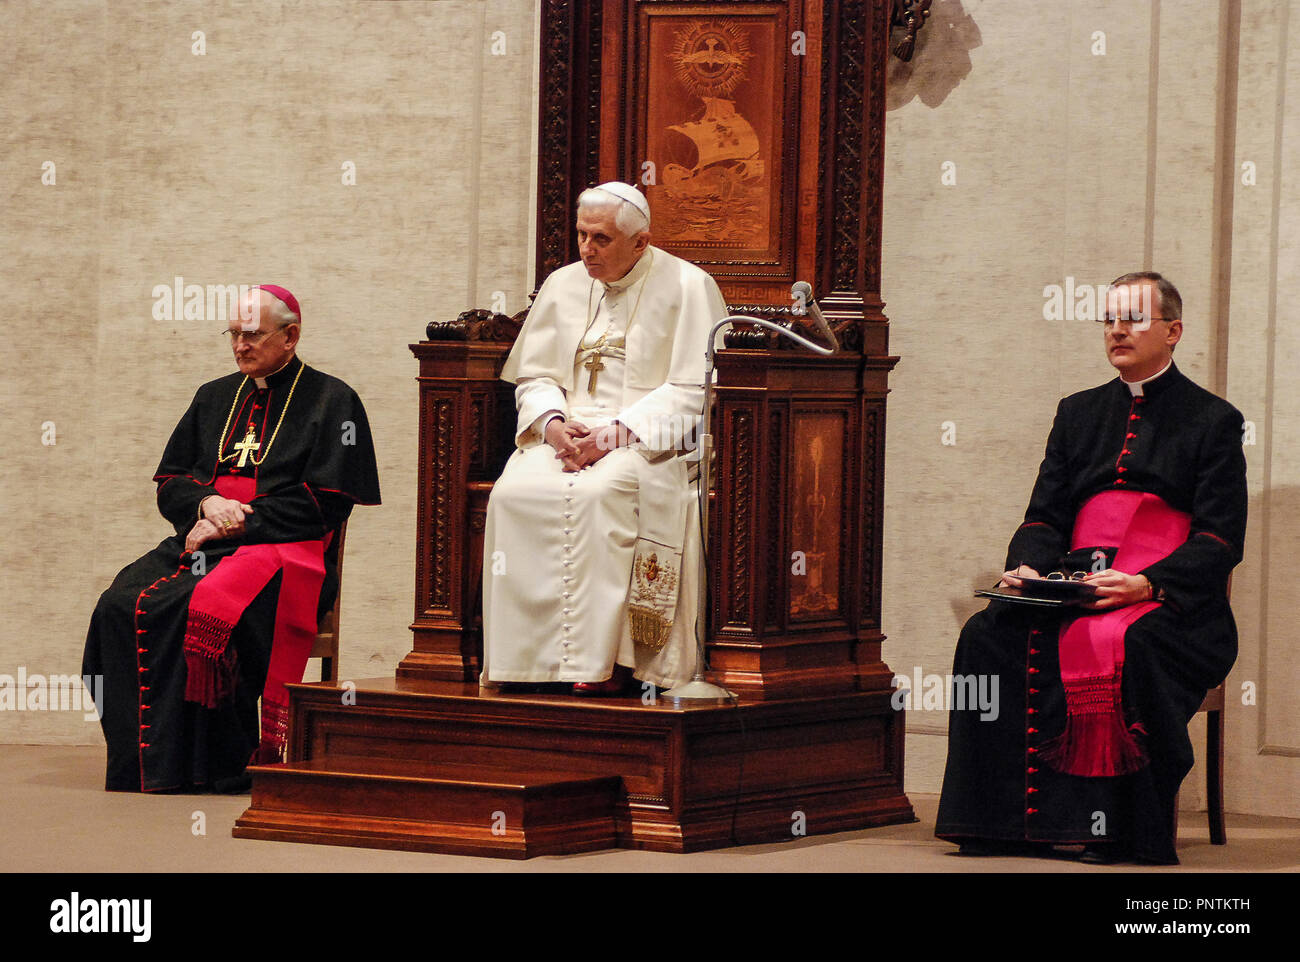 Vatican City 25/01/2008 - Pope Benedict XVi - Discourse to the members of the Mixed Working Group between the Catholic Church and the Ecumenical Council of Churches, , sala delle Benedizioni, Hall of Blessings Stock Photo